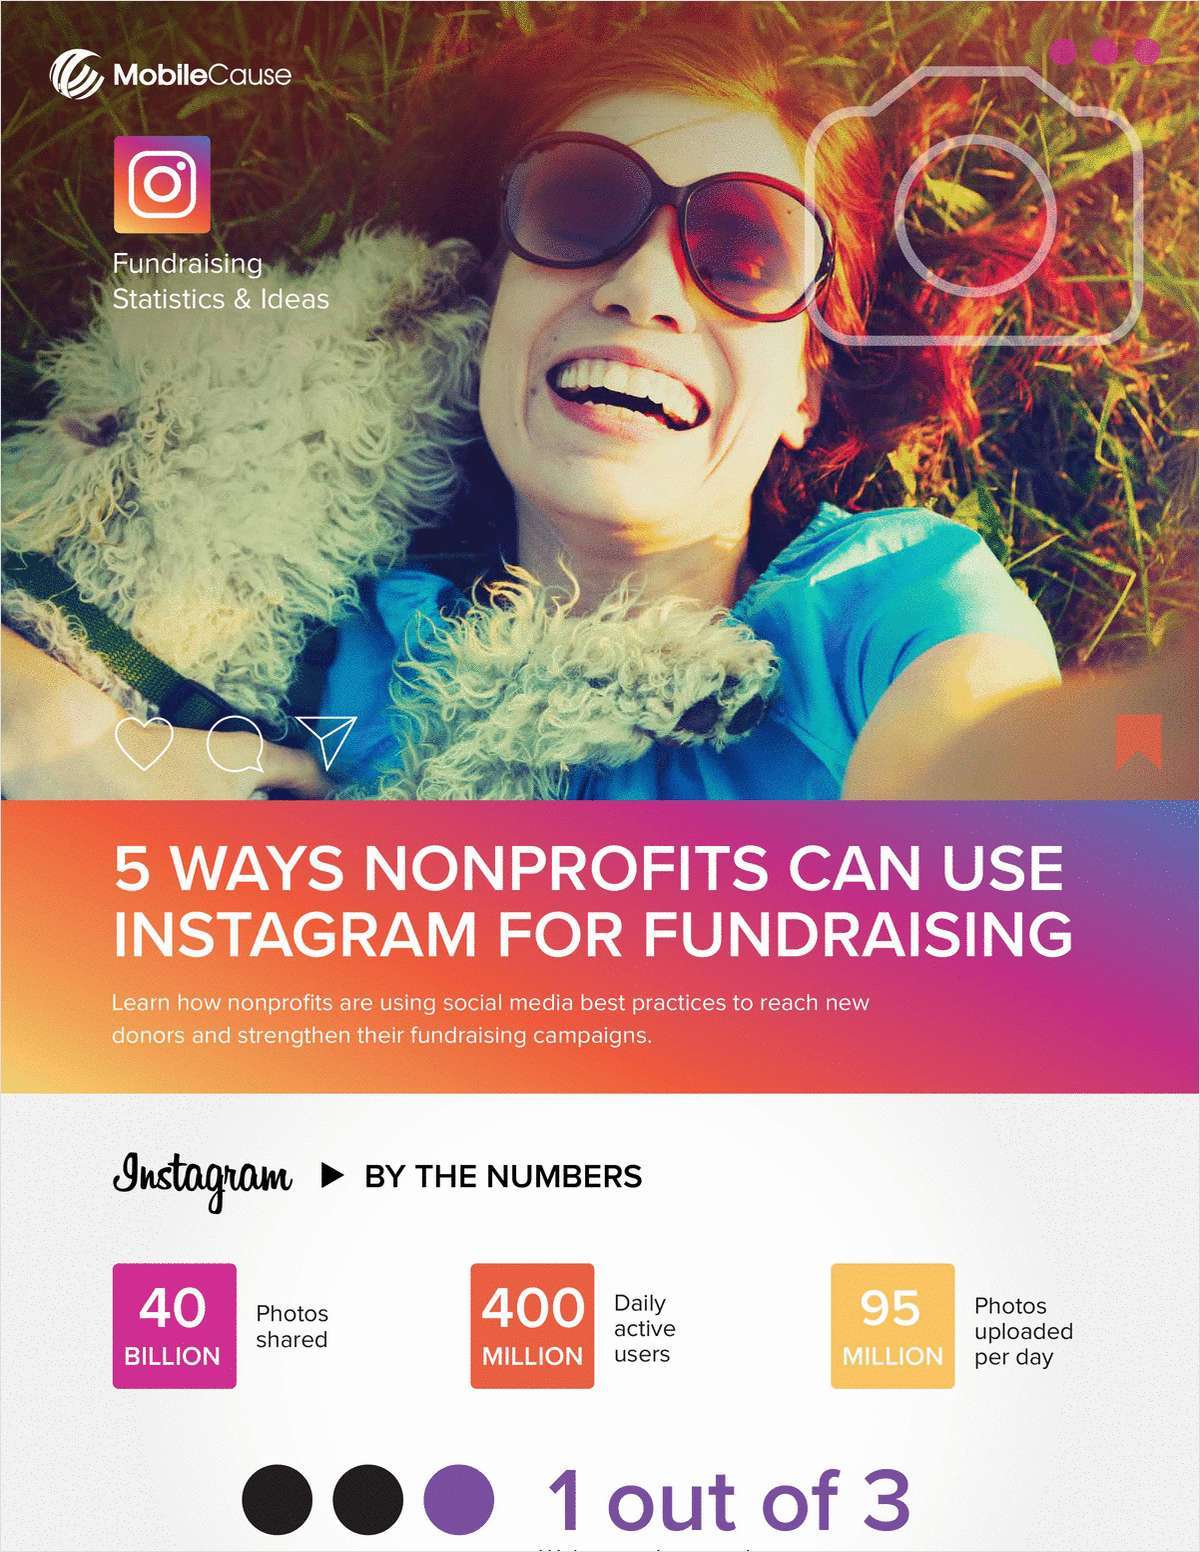 5 Ways Nonprofits Can Use Instagram for Fundraising